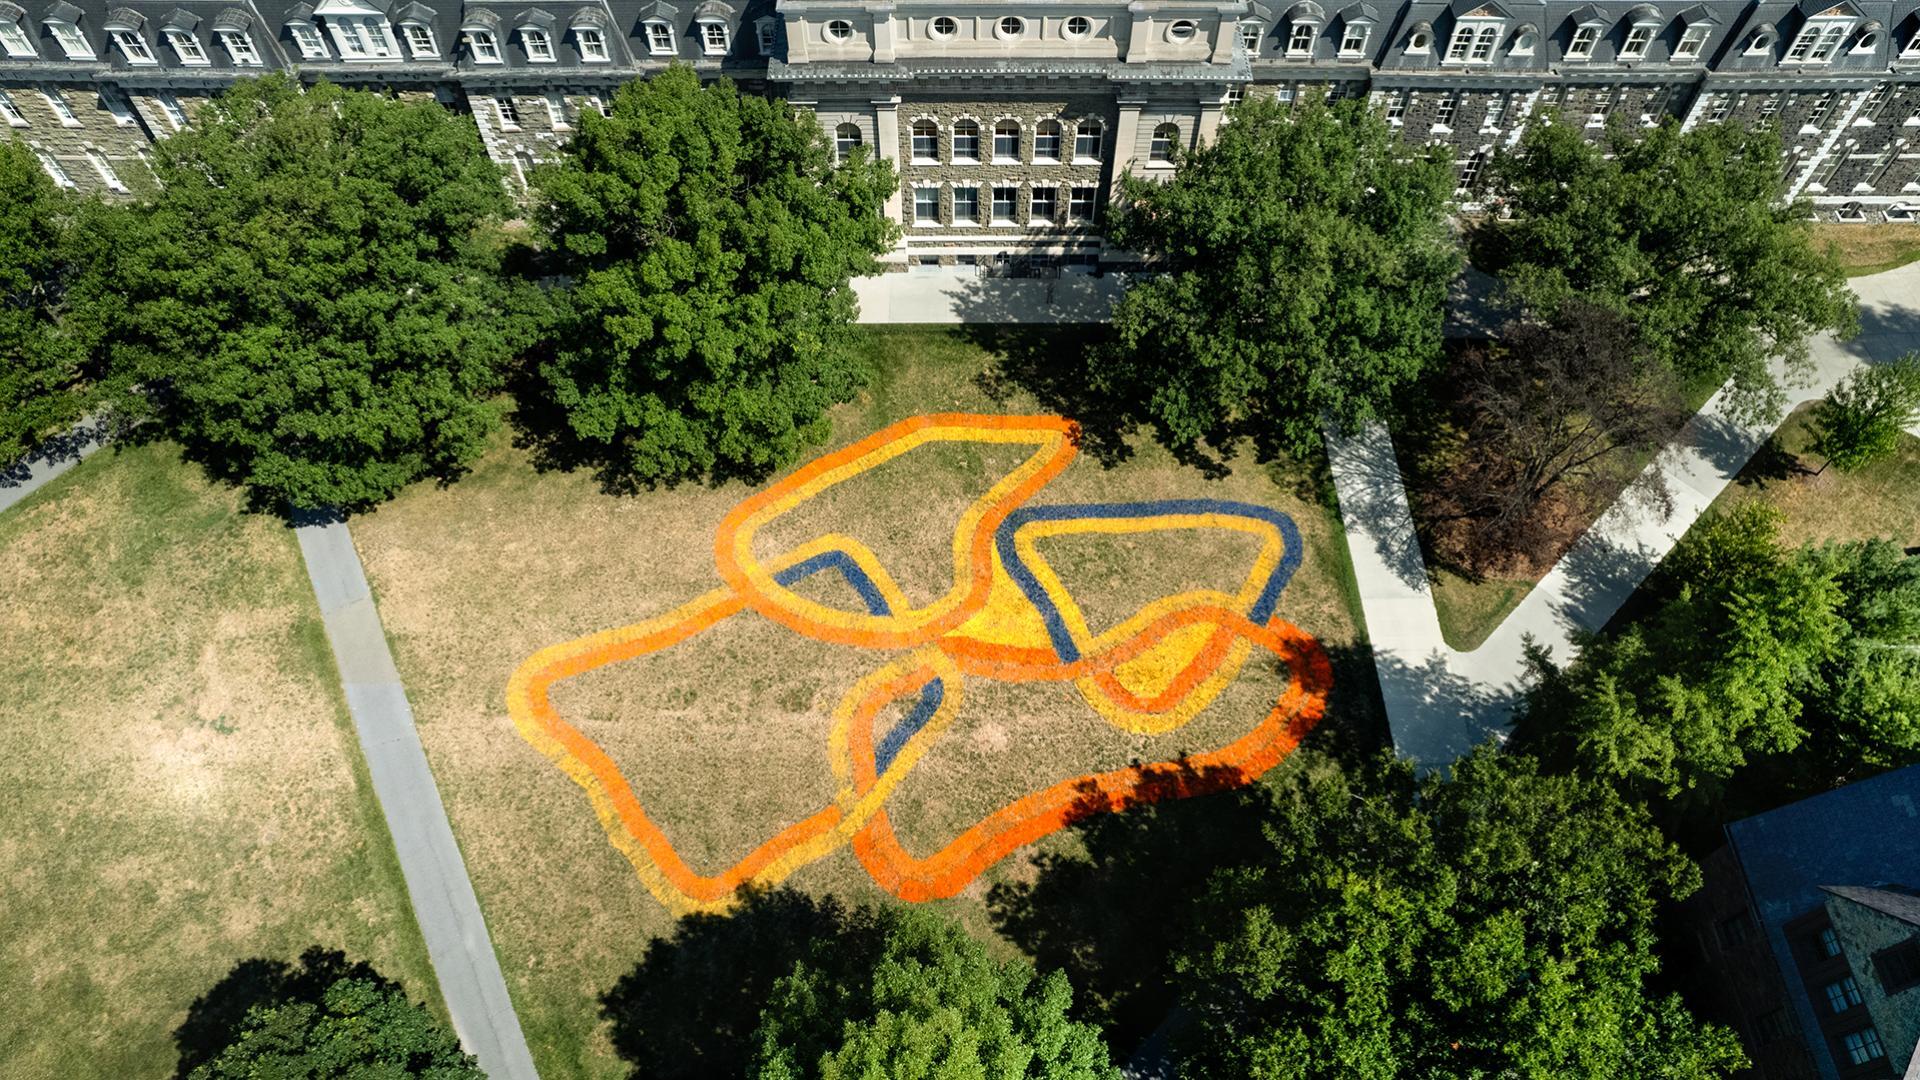 Aerial view of a geometric painting made on the lawn in front of a large brick building.